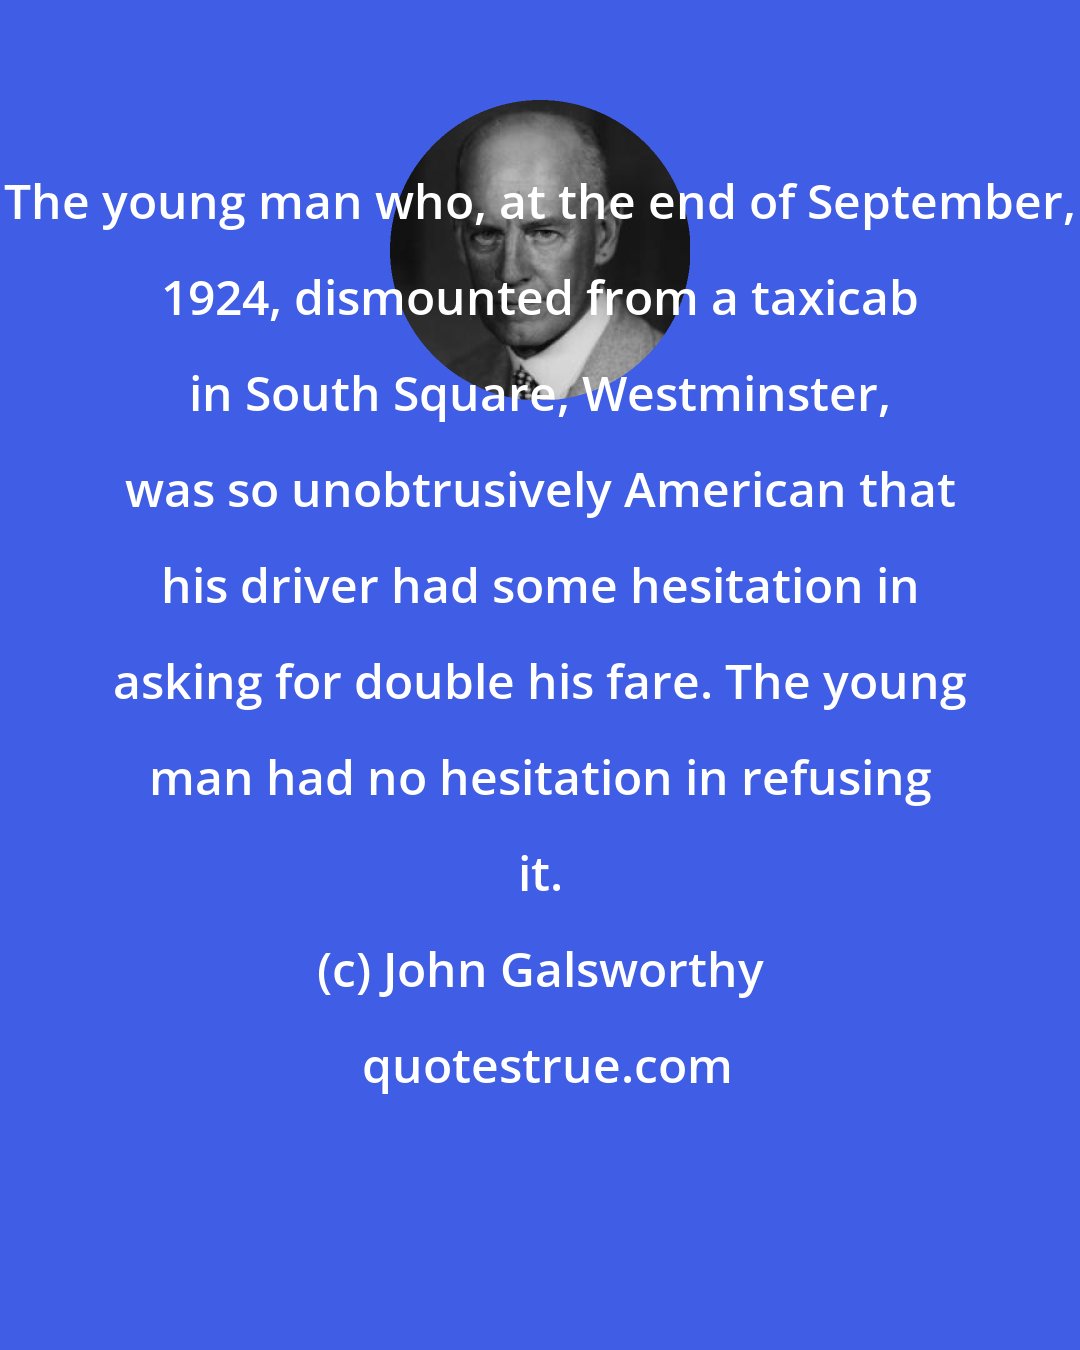 John Galsworthy: The young man who, at the end of September, 1924, dismounted from a taxicab in South Square, Westminster, was so unobtrusively American that his driver had some hesitation in asking for double his fare. The young man had no hesitation in refusing it.